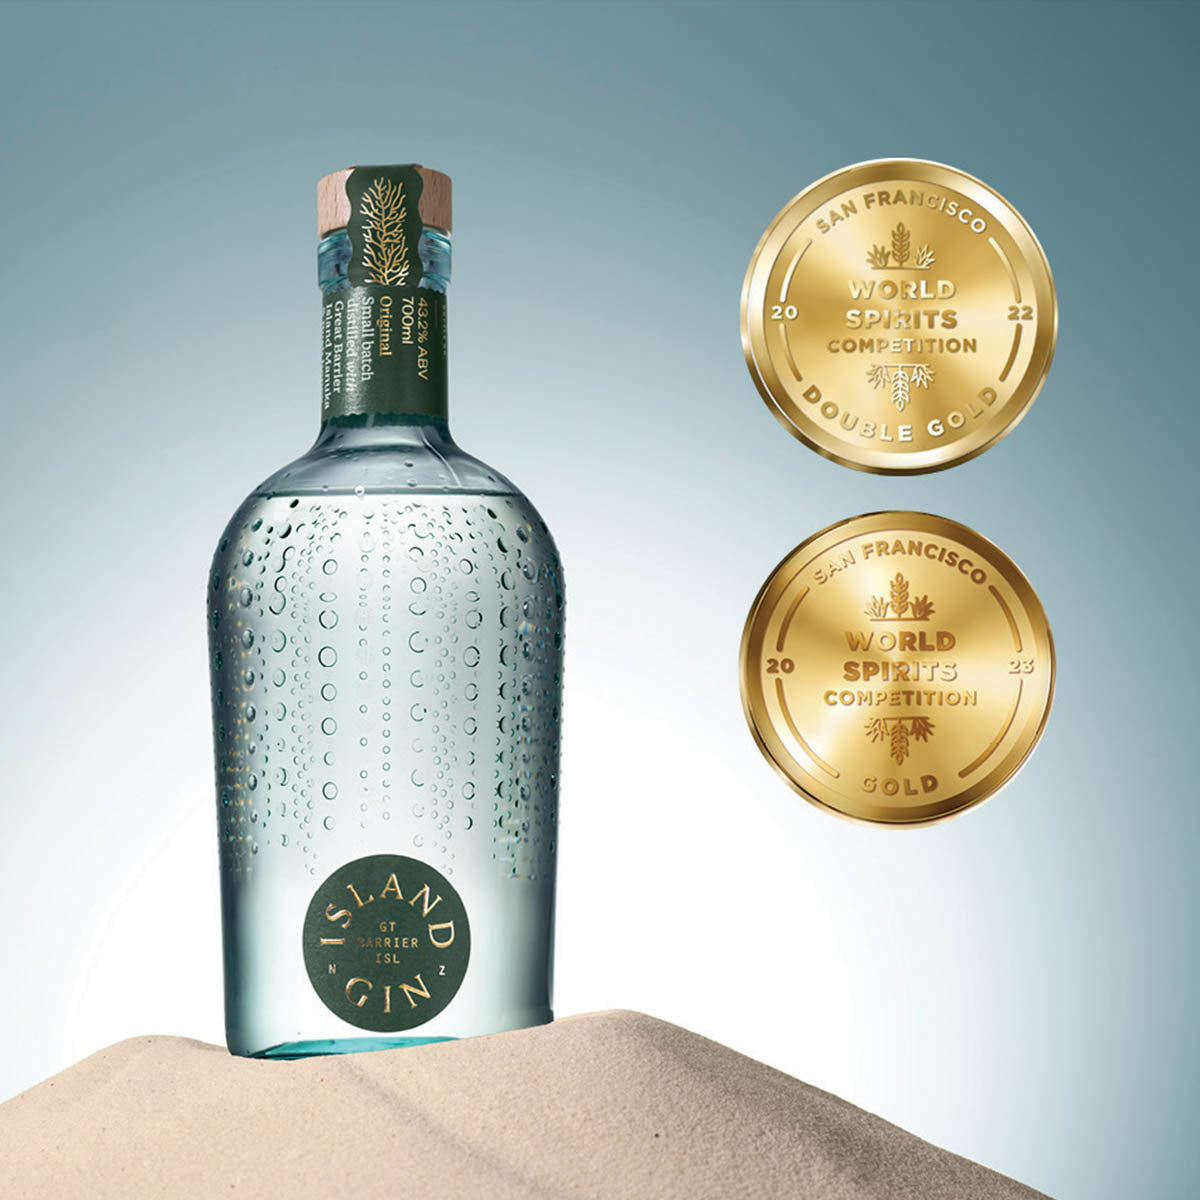 Island Gin WIns Double Gold Awards at World Spirits Competition